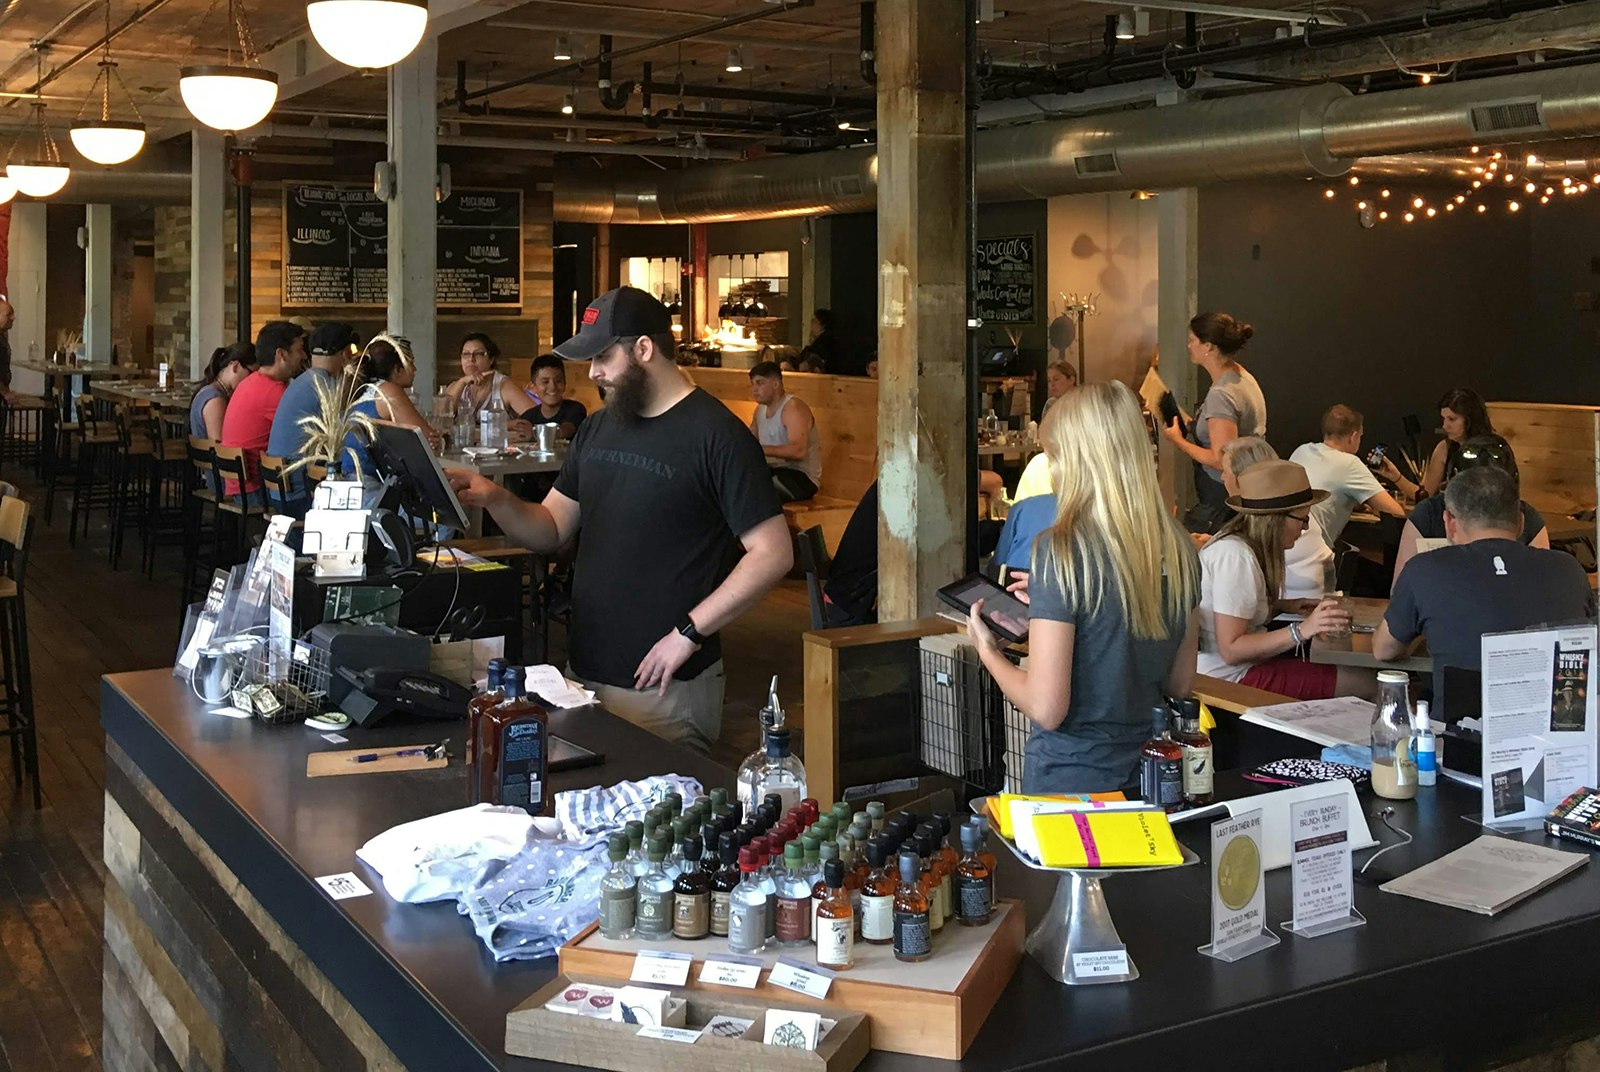 A man and a woman stand behind a counter while dozens of people fill booths and tables behind them in an open, high-ceilinged taproom in Harbor Country Michigan